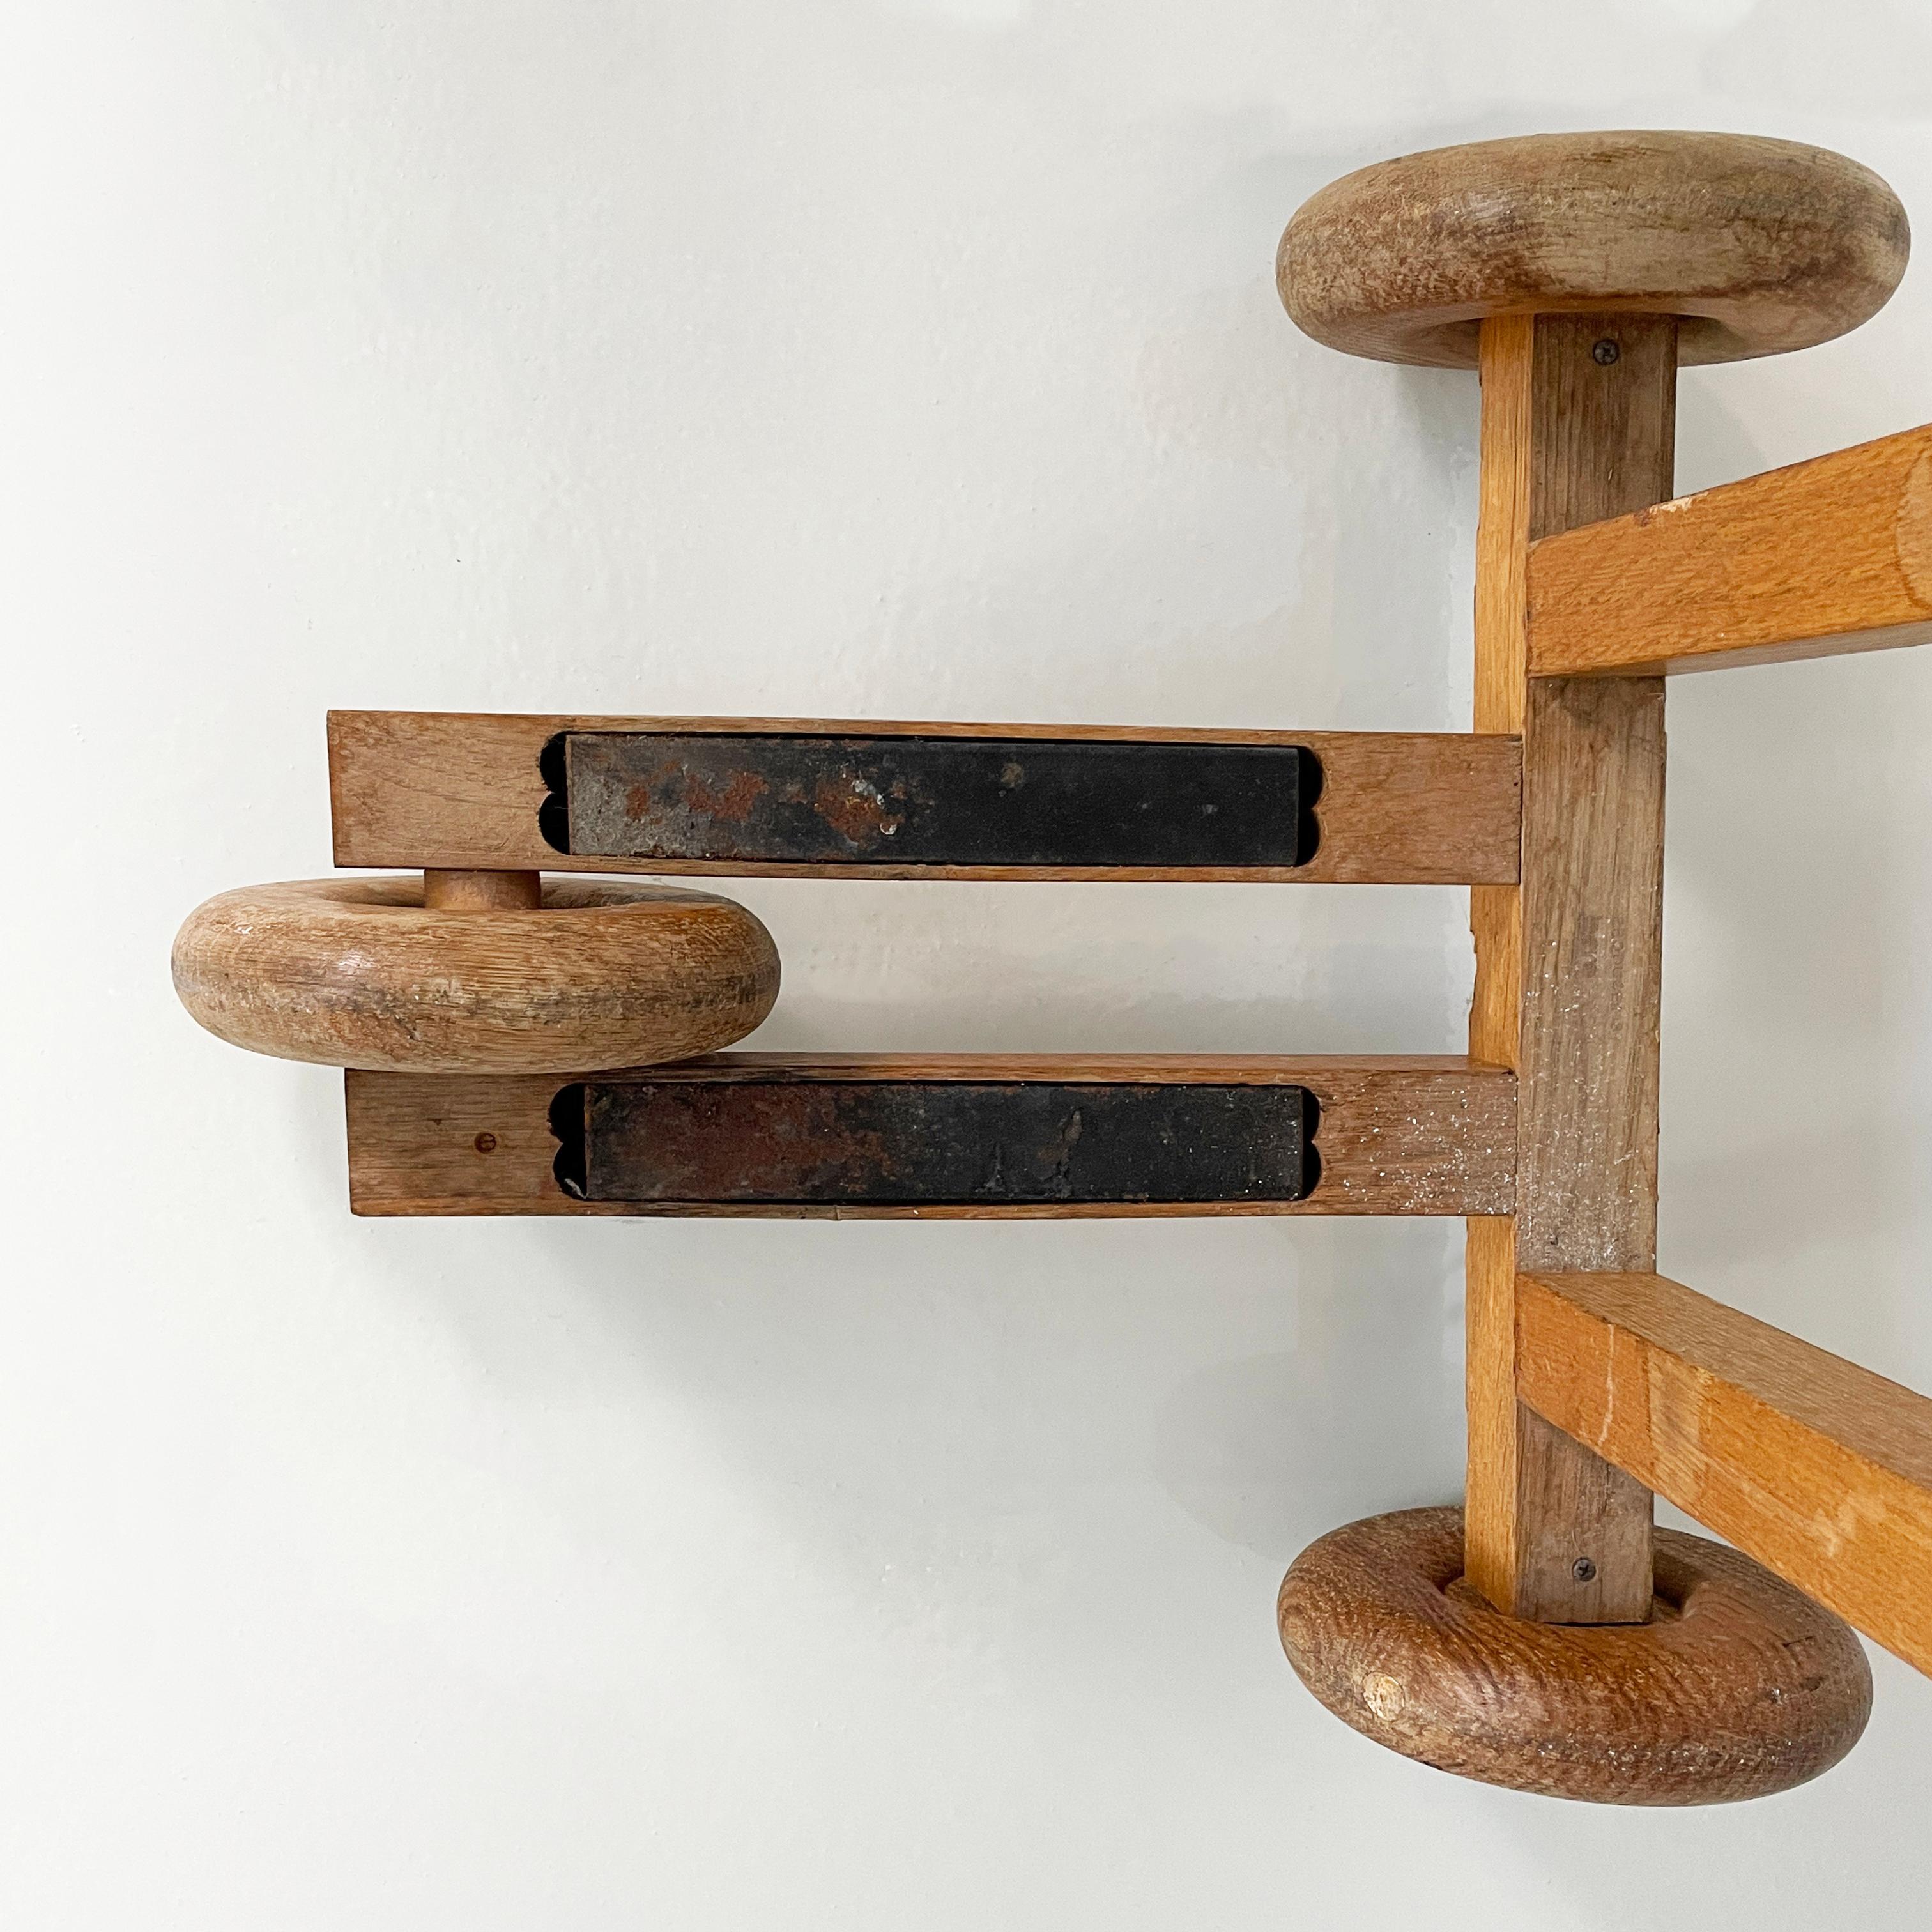 Italian modern Wood valet stand with hat holder by BeroDesign Cacharel, 1980s For Sale 12